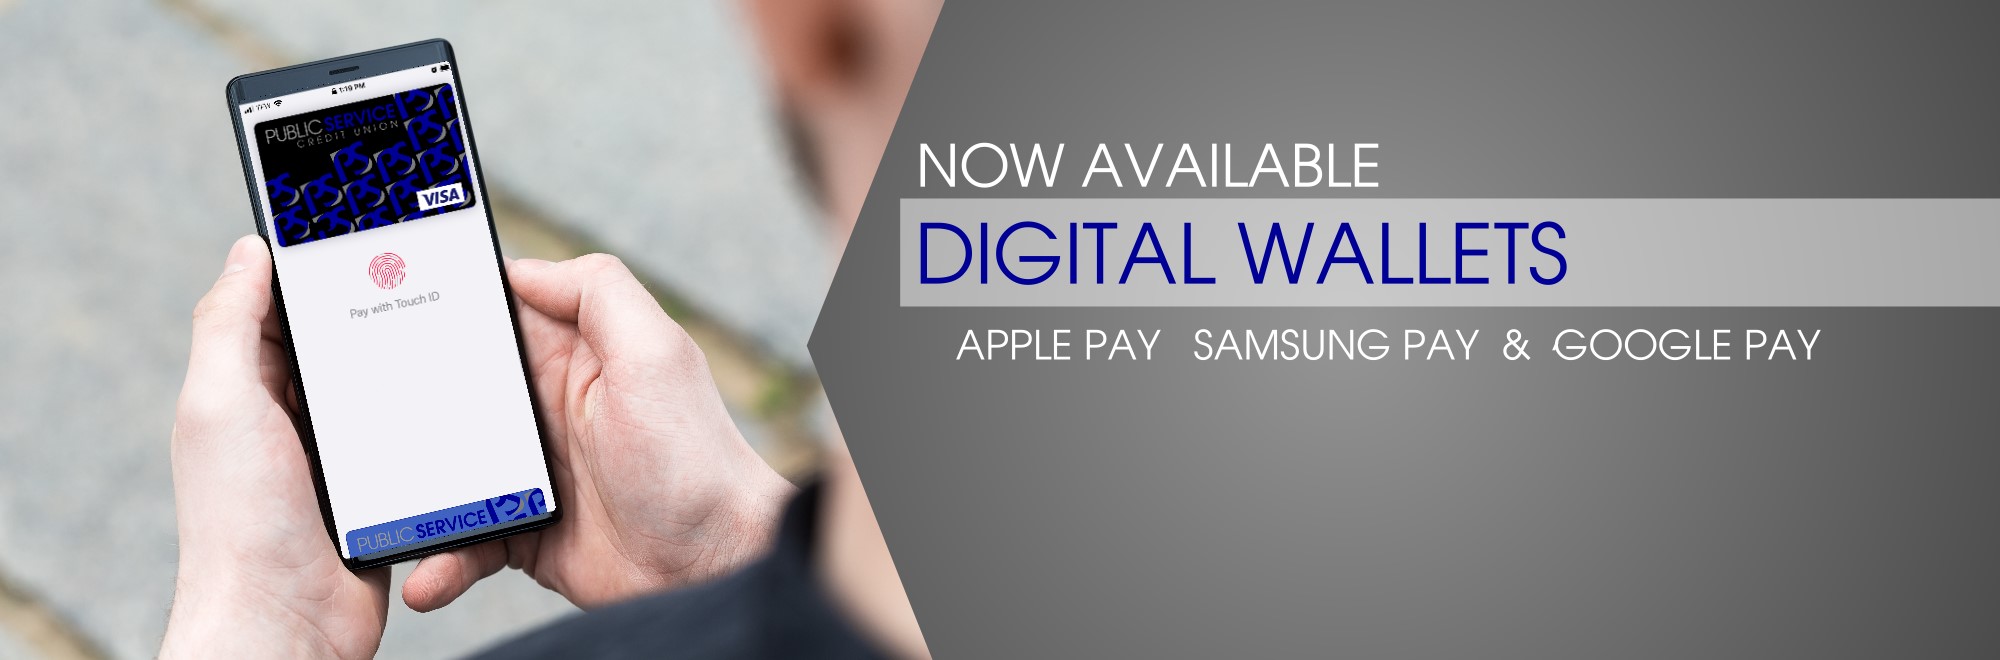 Now Available Digital Wallets Apple Pay Samsung Pay Google Pay